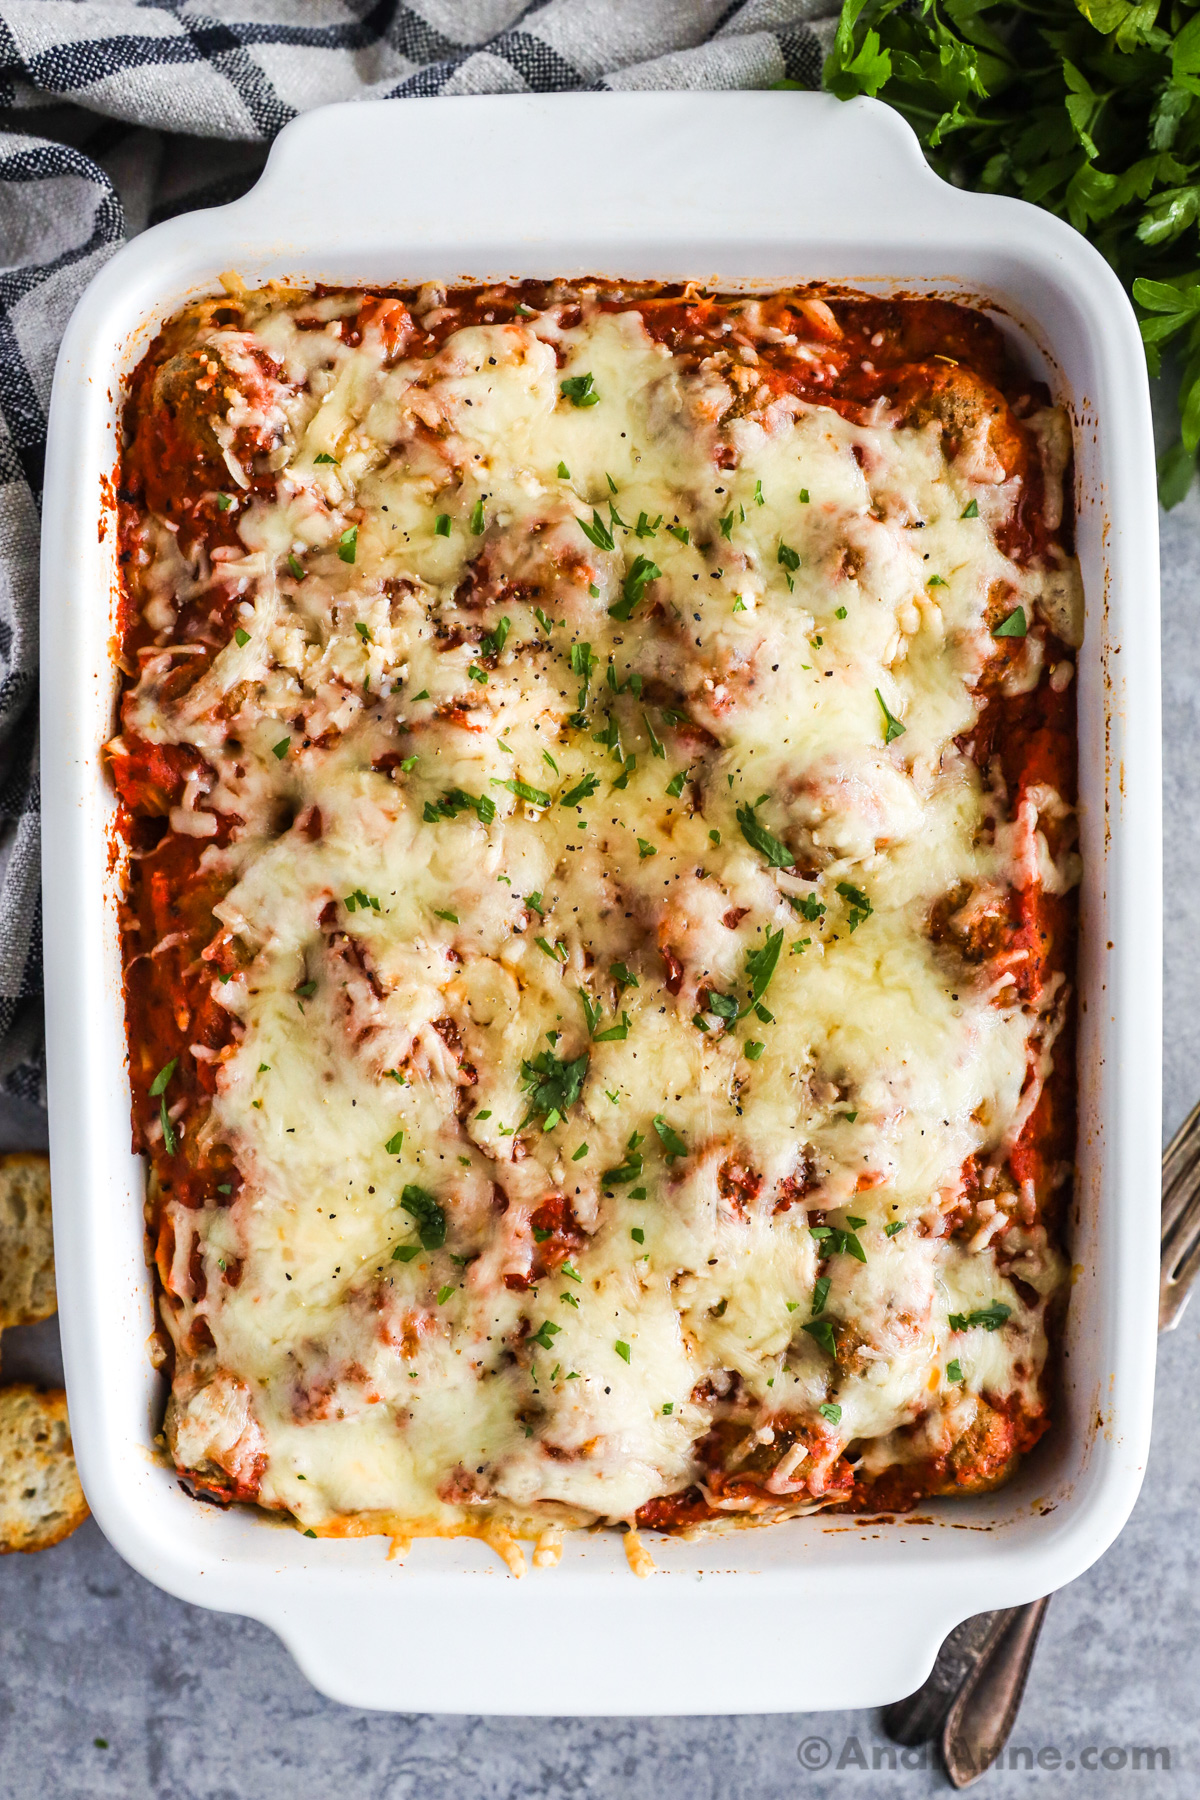 A casserole dish with baked spaghetti and meatballs topped with melted cheese.